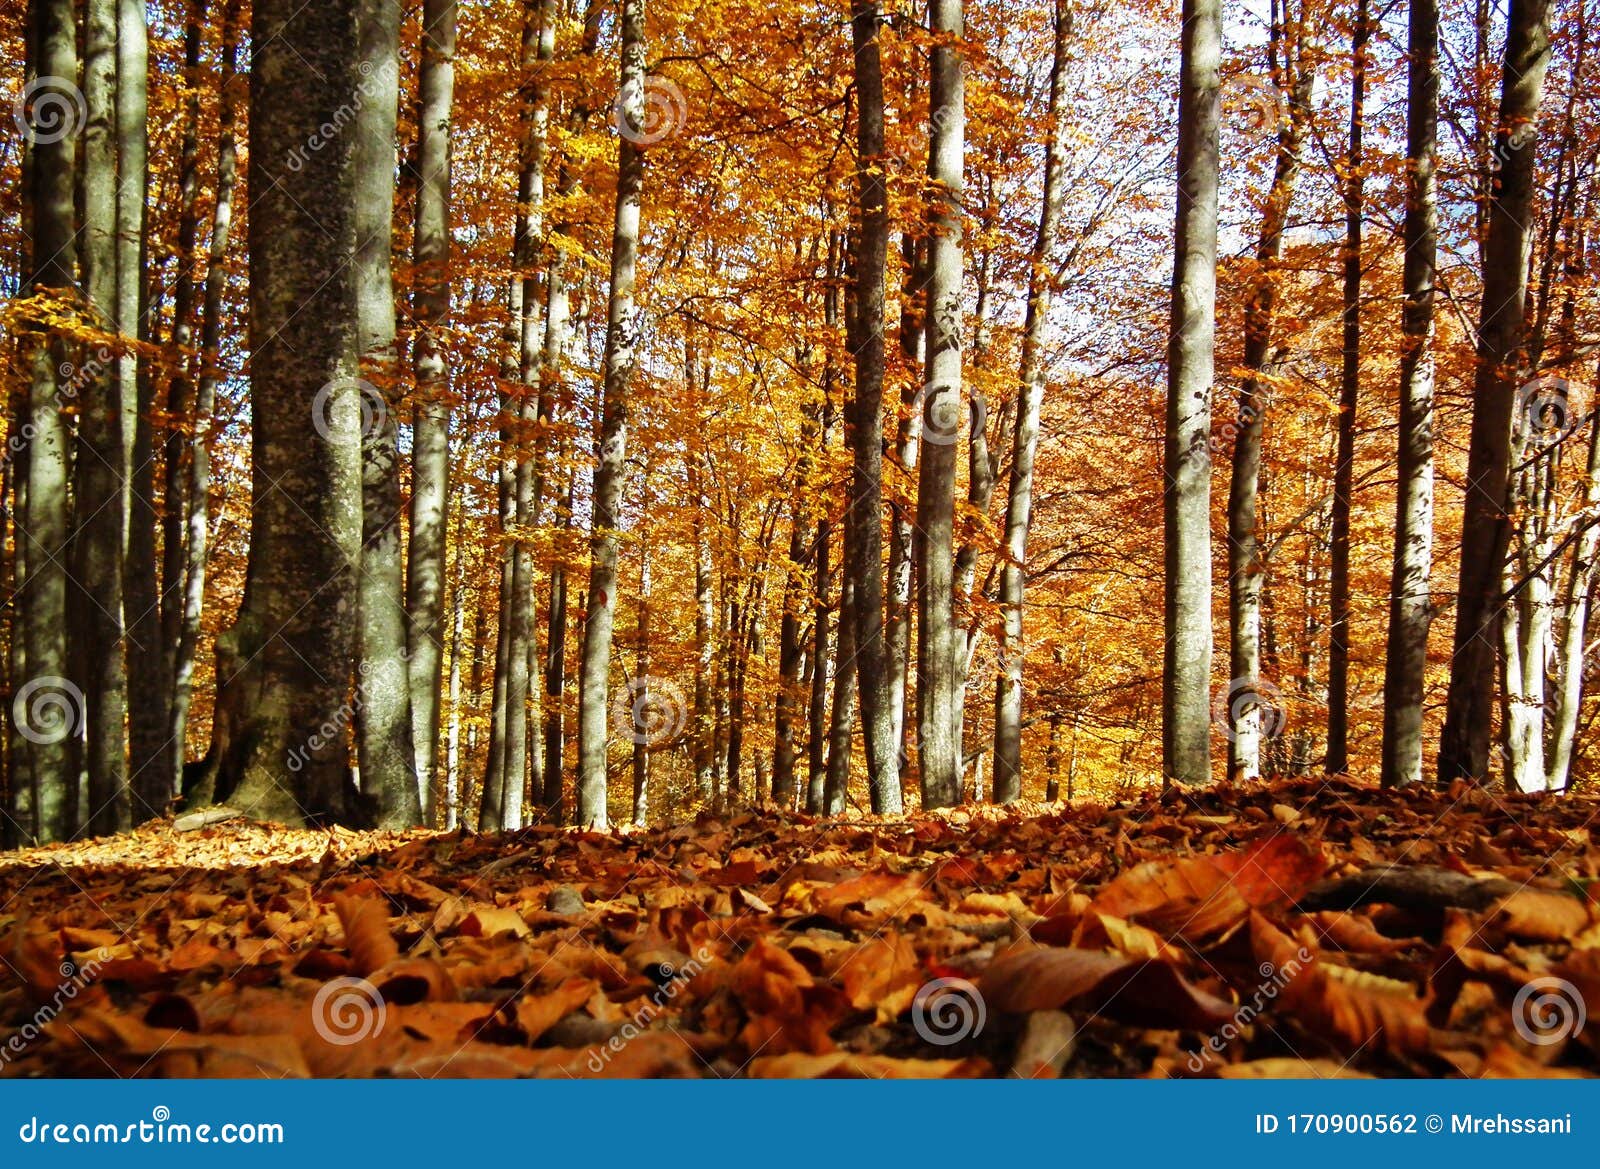 forg eye view of colorful forest in autumn